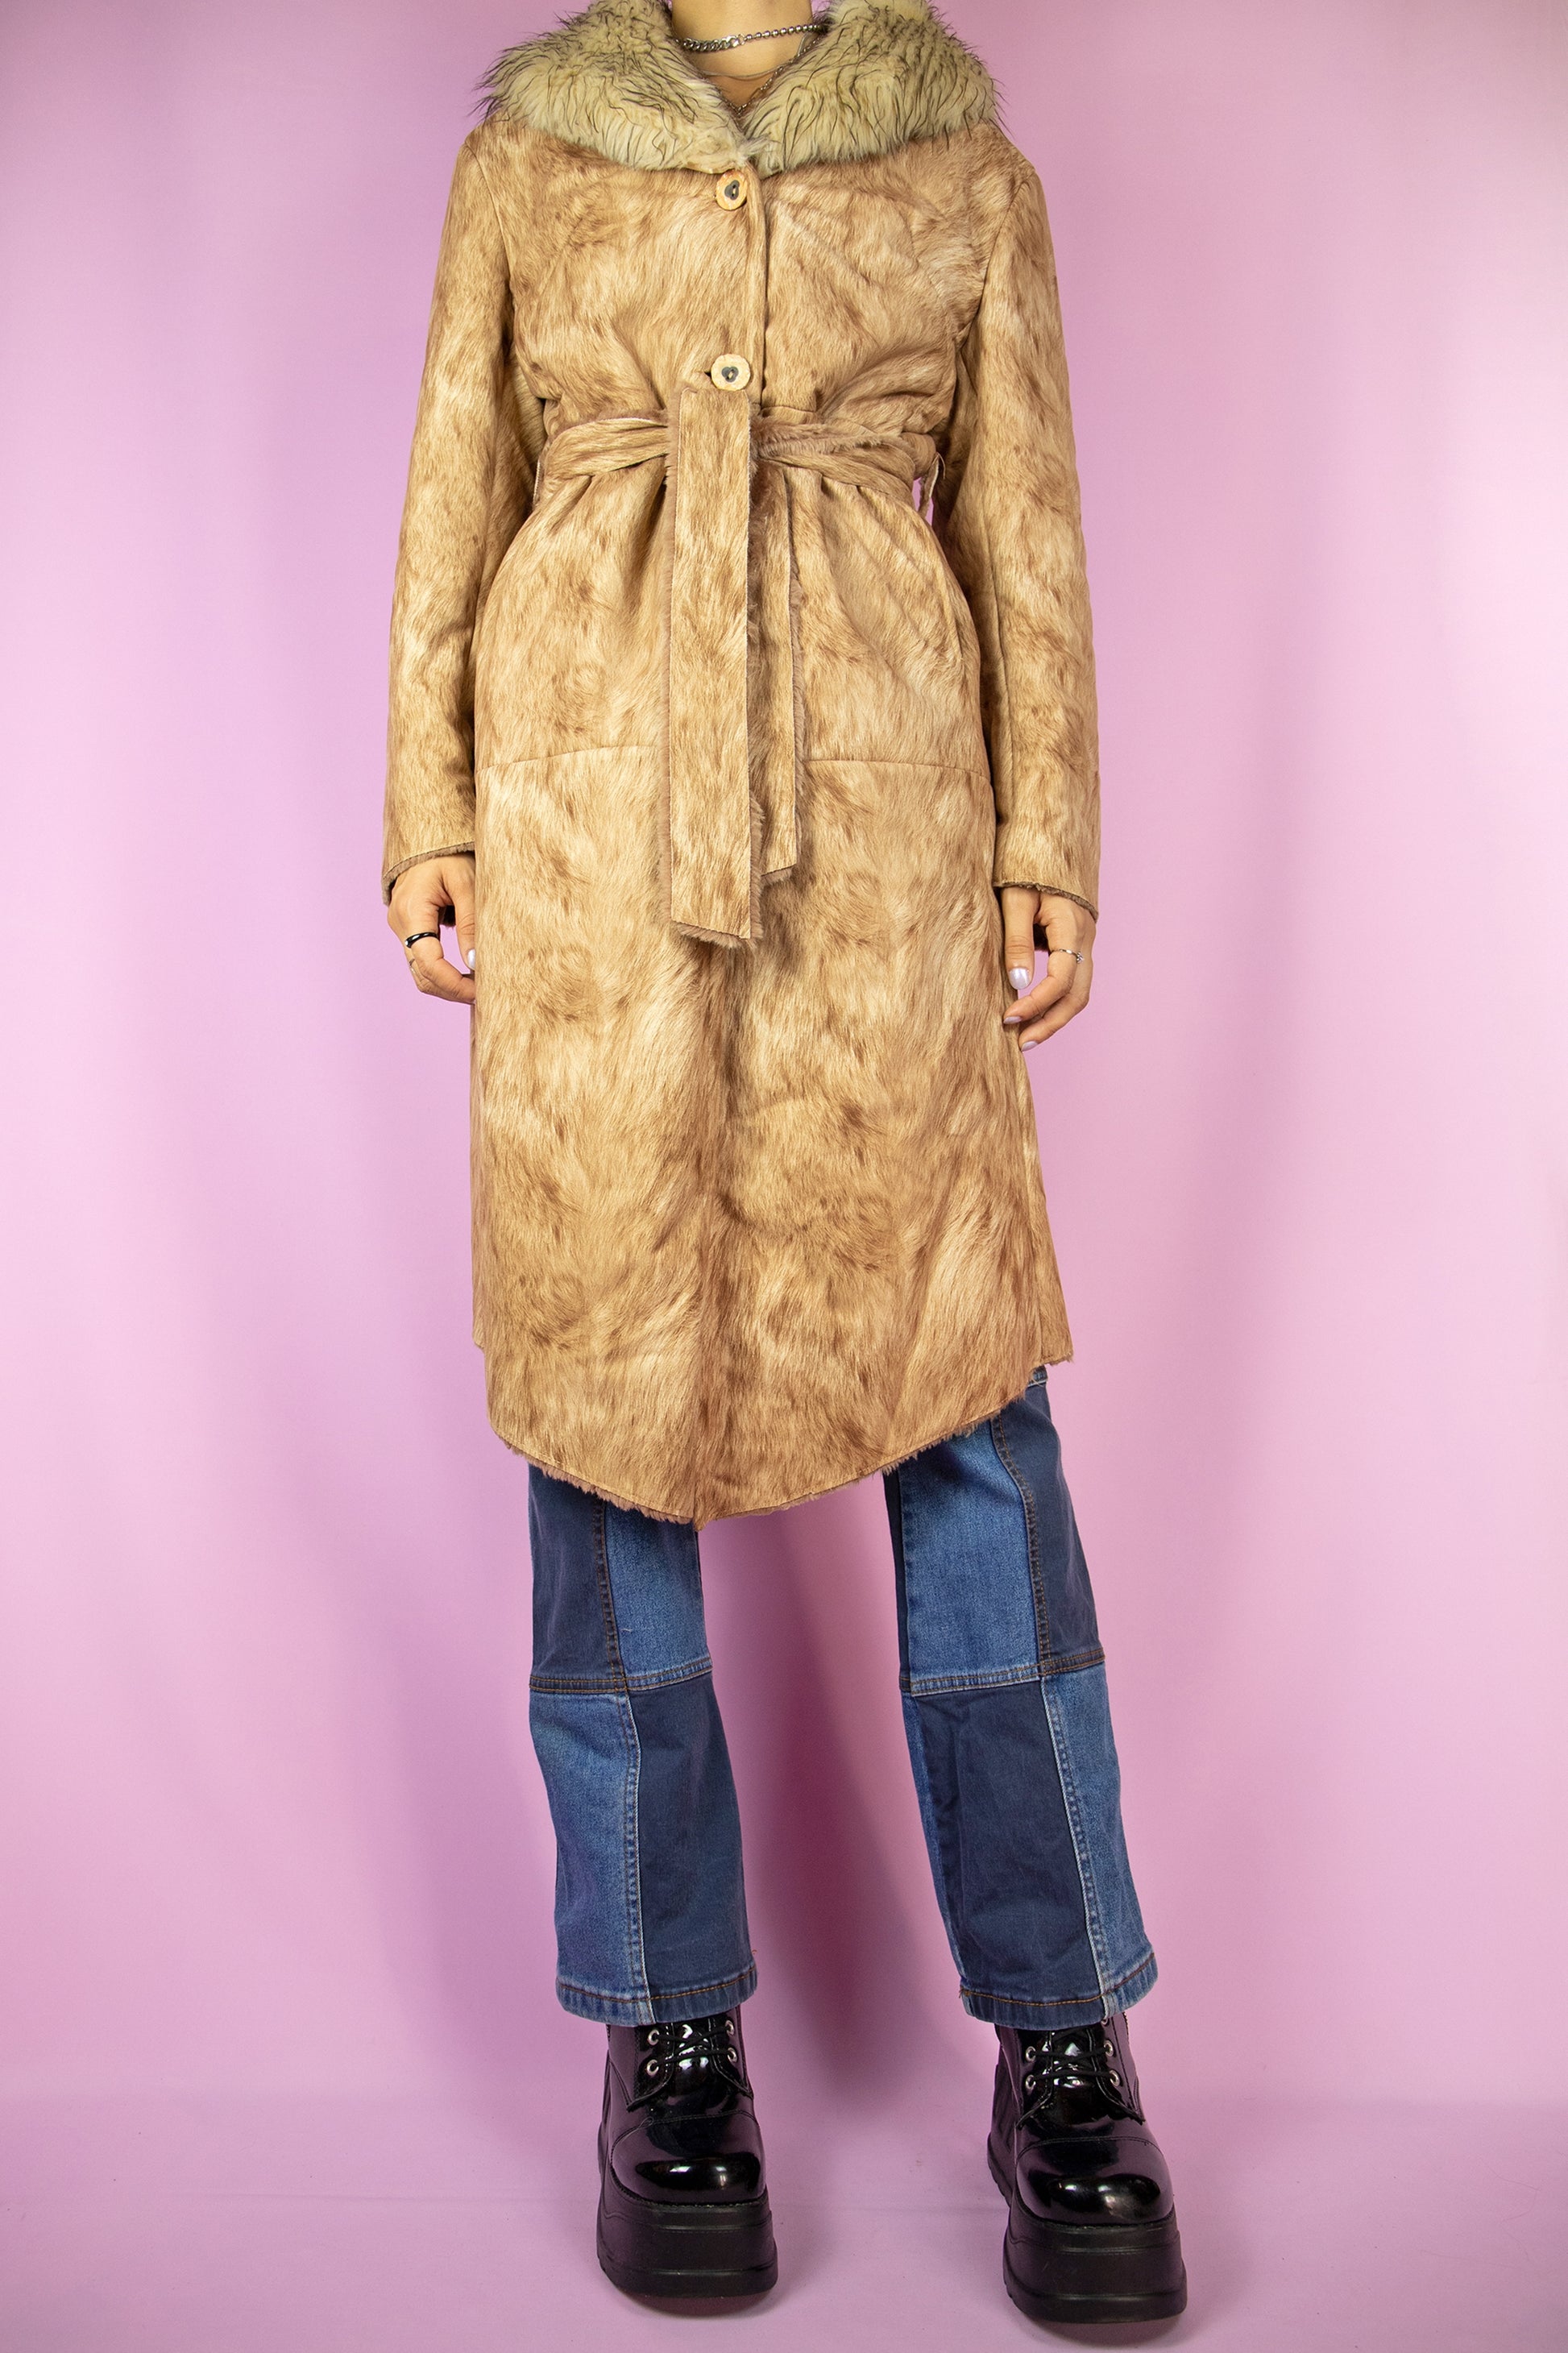 The Y2K Brown Faux Fur Long Coat is vintage abstract graphic printed maxi jacket featuring a faux fur collar, pockets, button closure, and a matching belt. Cyber 2000s penny lane winter statement coat.